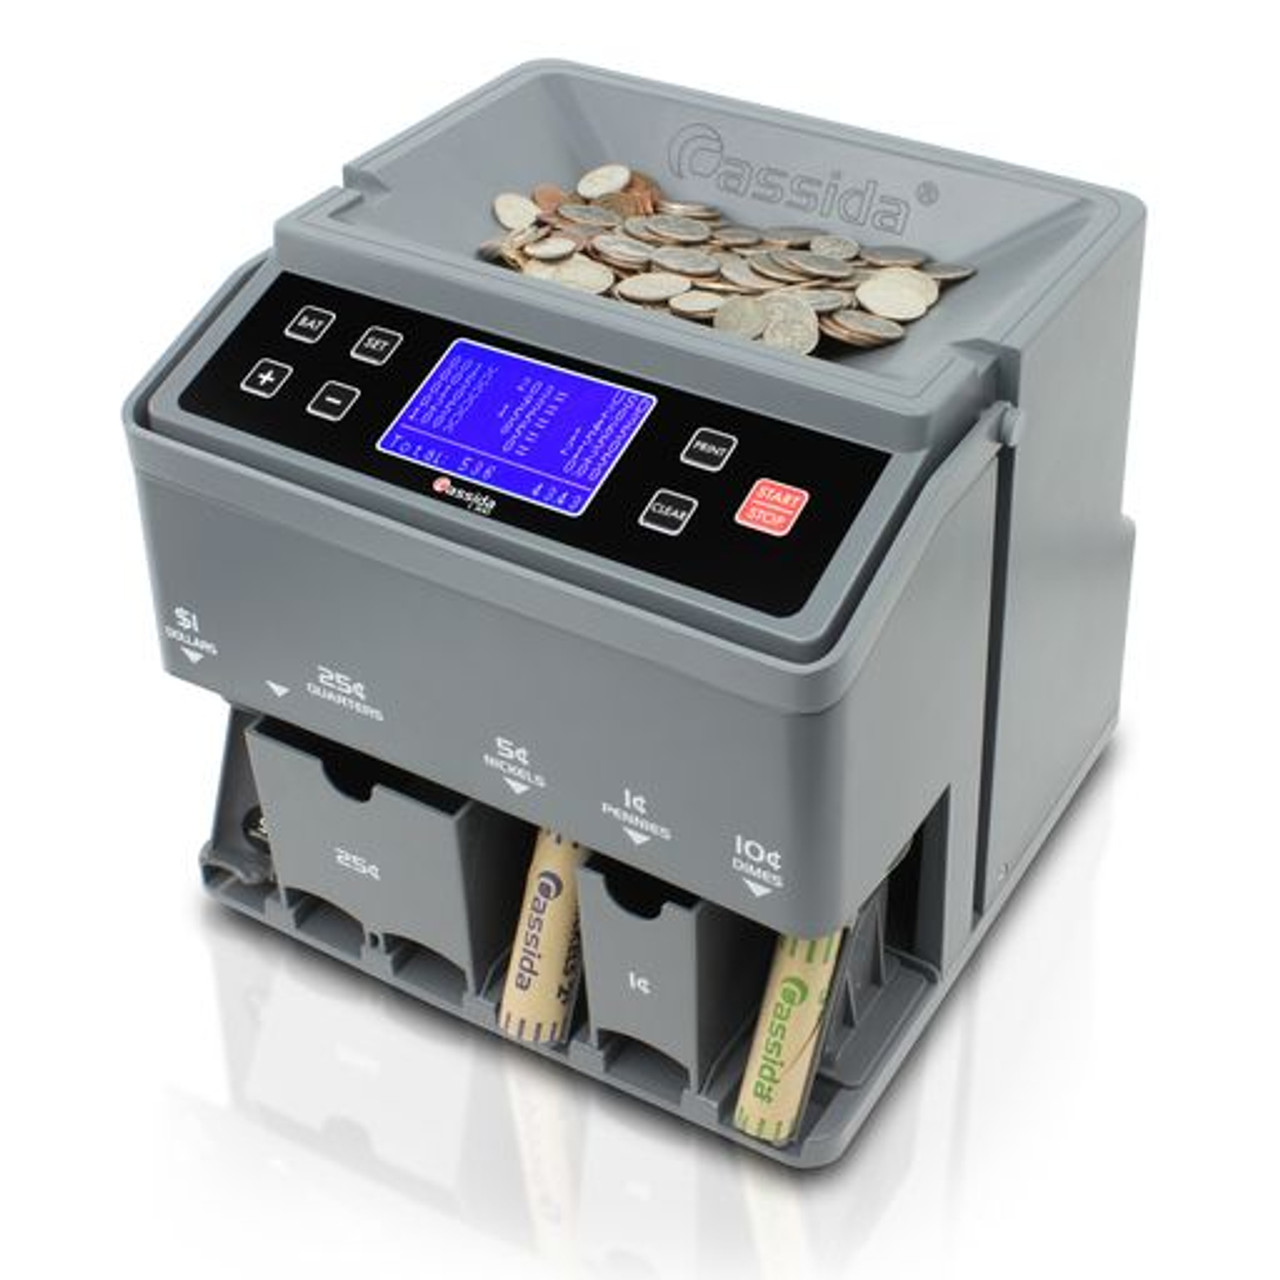 COIN SUPPLIES - Scale to weigh your coins or for other uses.